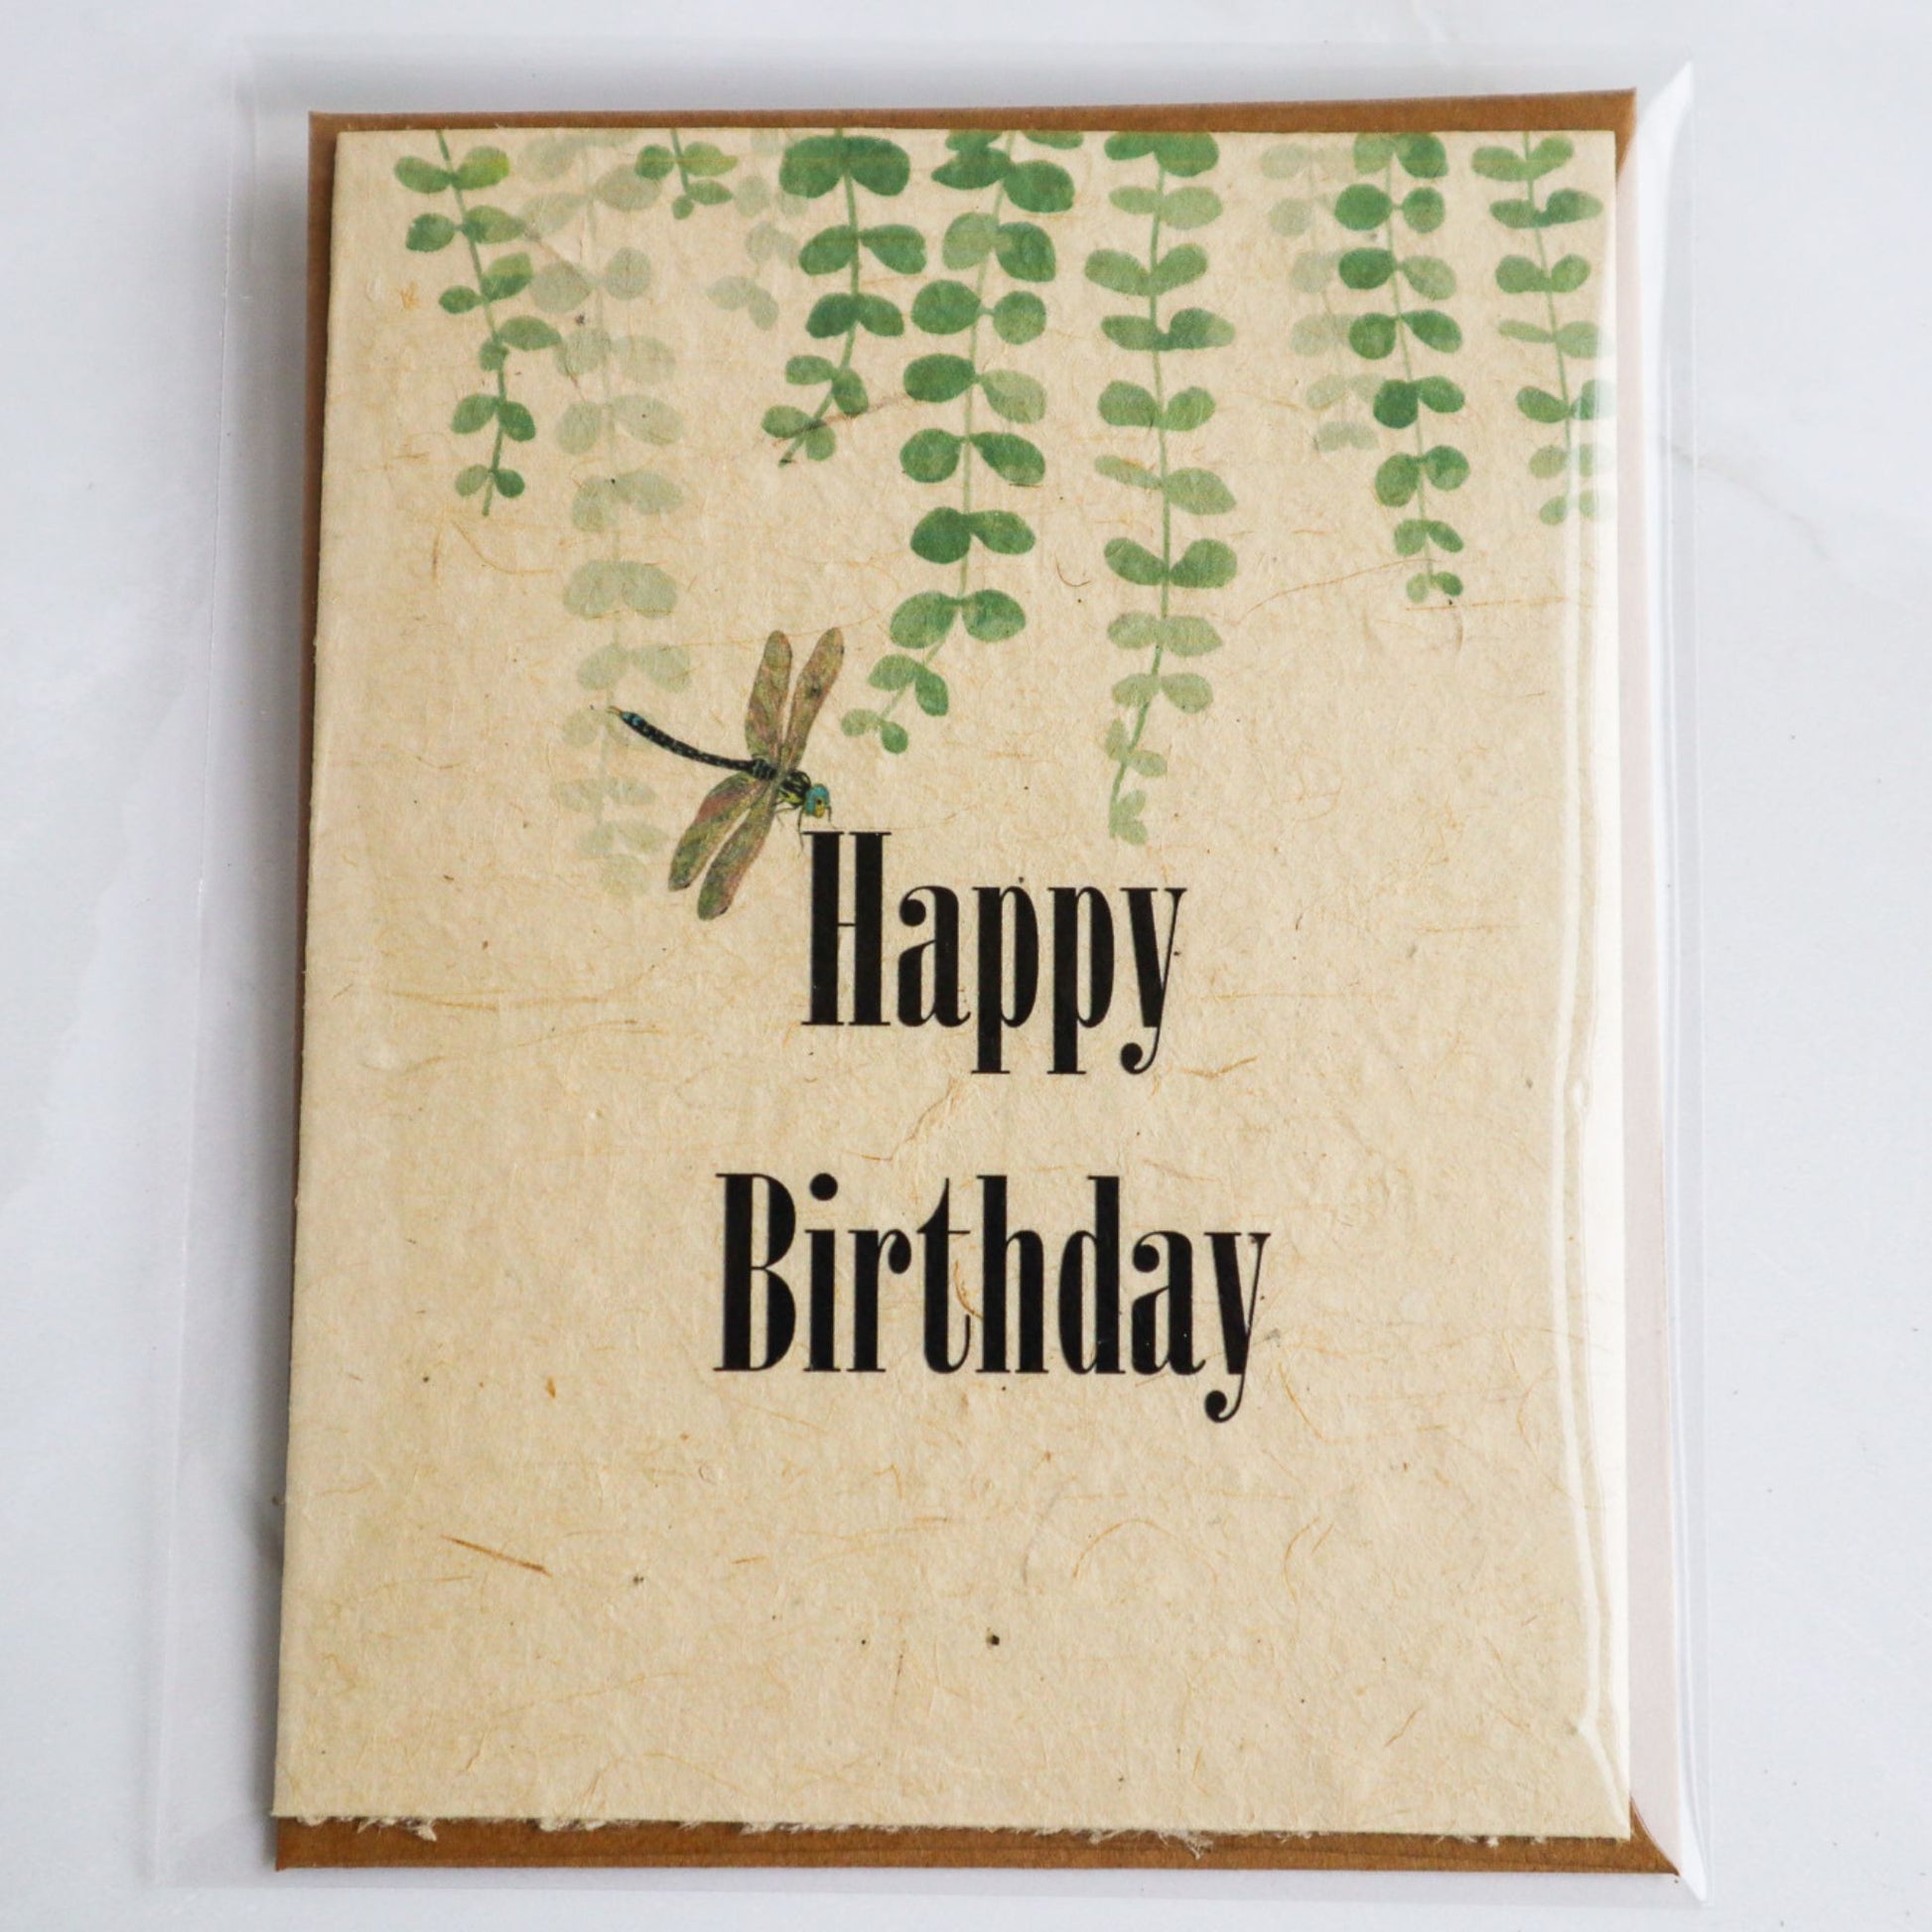 Plantable seed paper birthday card with dragonfly and greenery. Card is in biodegradable sleeve with kraft envelope.